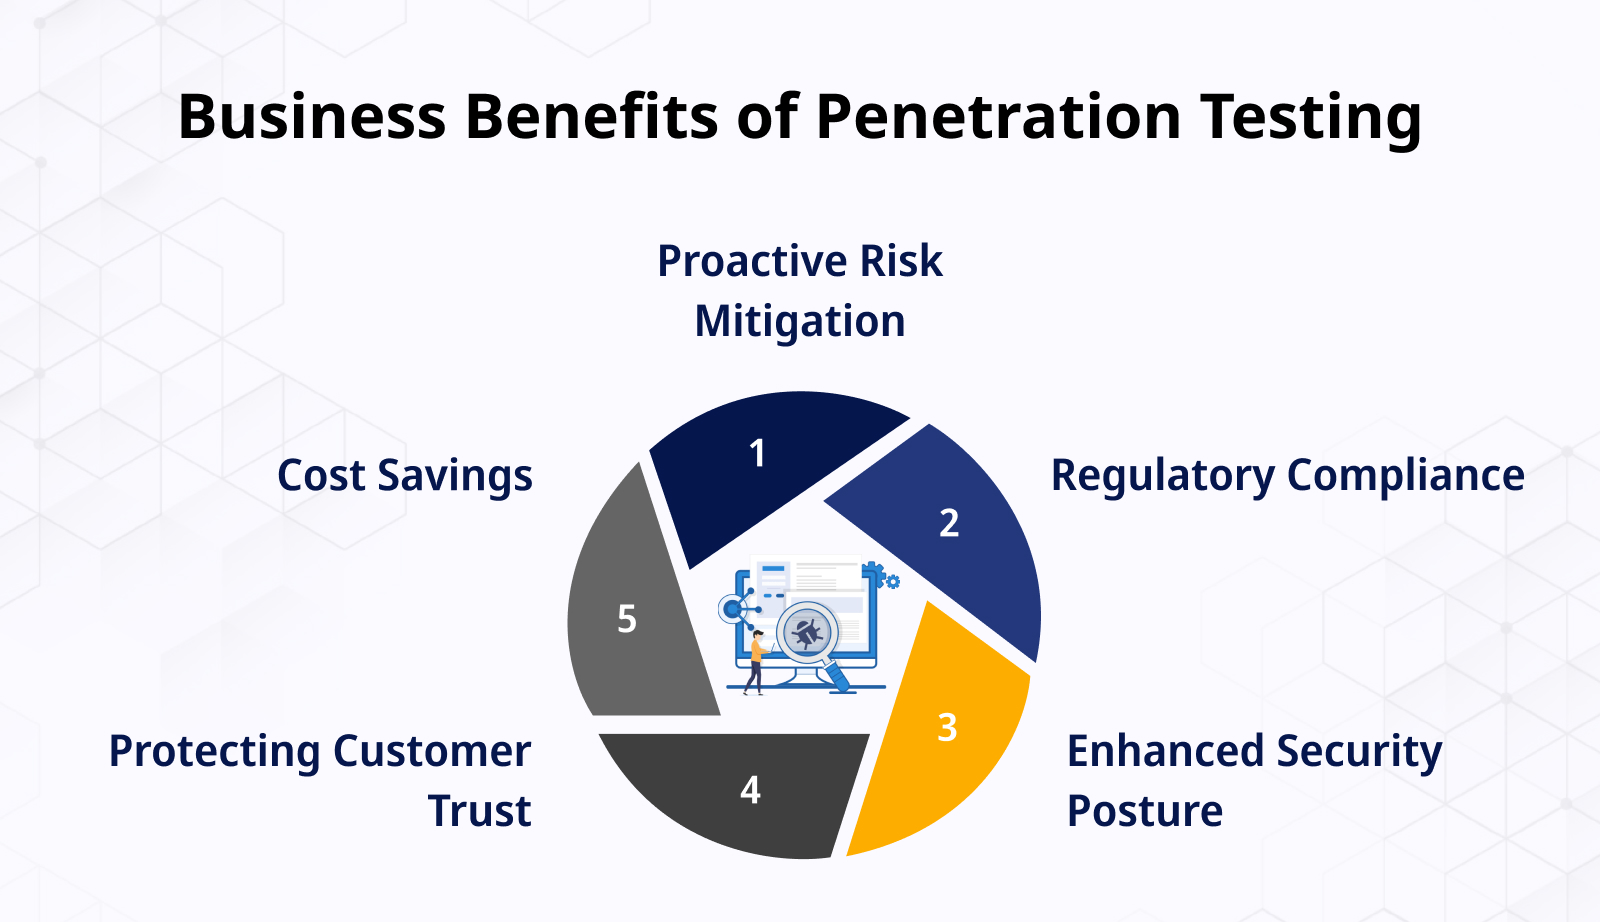 Business Benefits of Penetration Testing